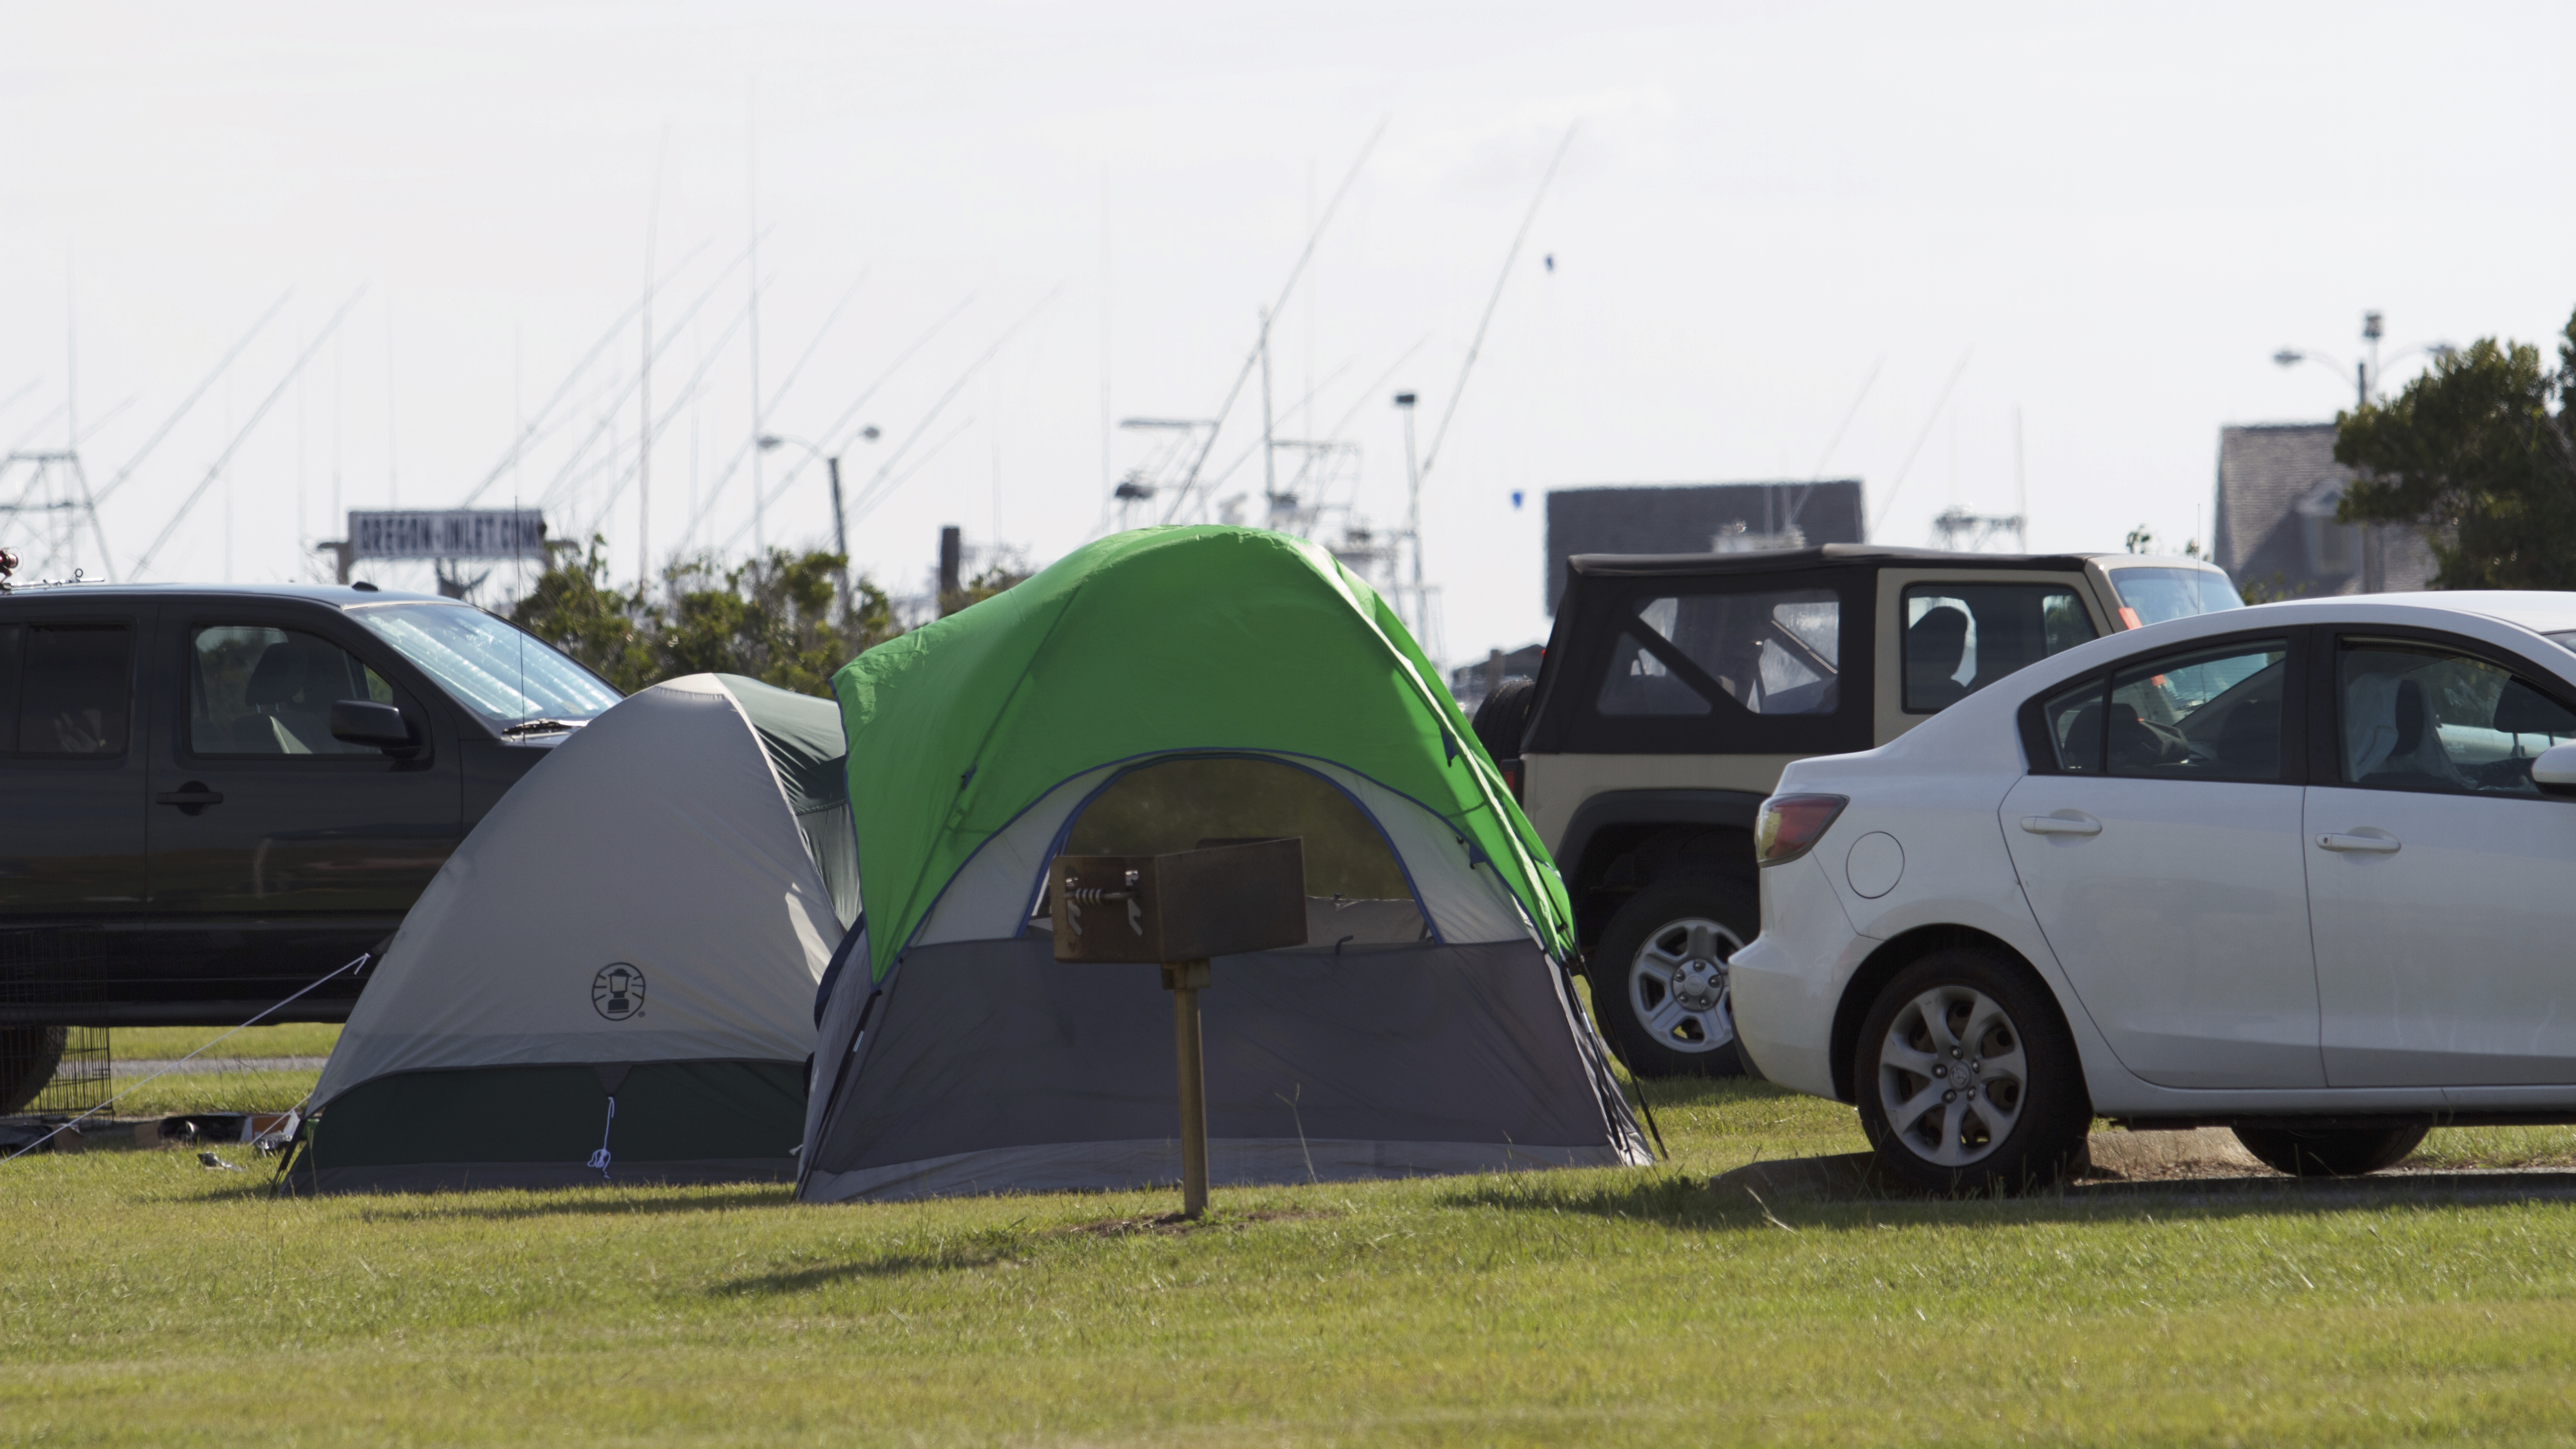 Tents and vehicles at the Oregon Inlet campground.